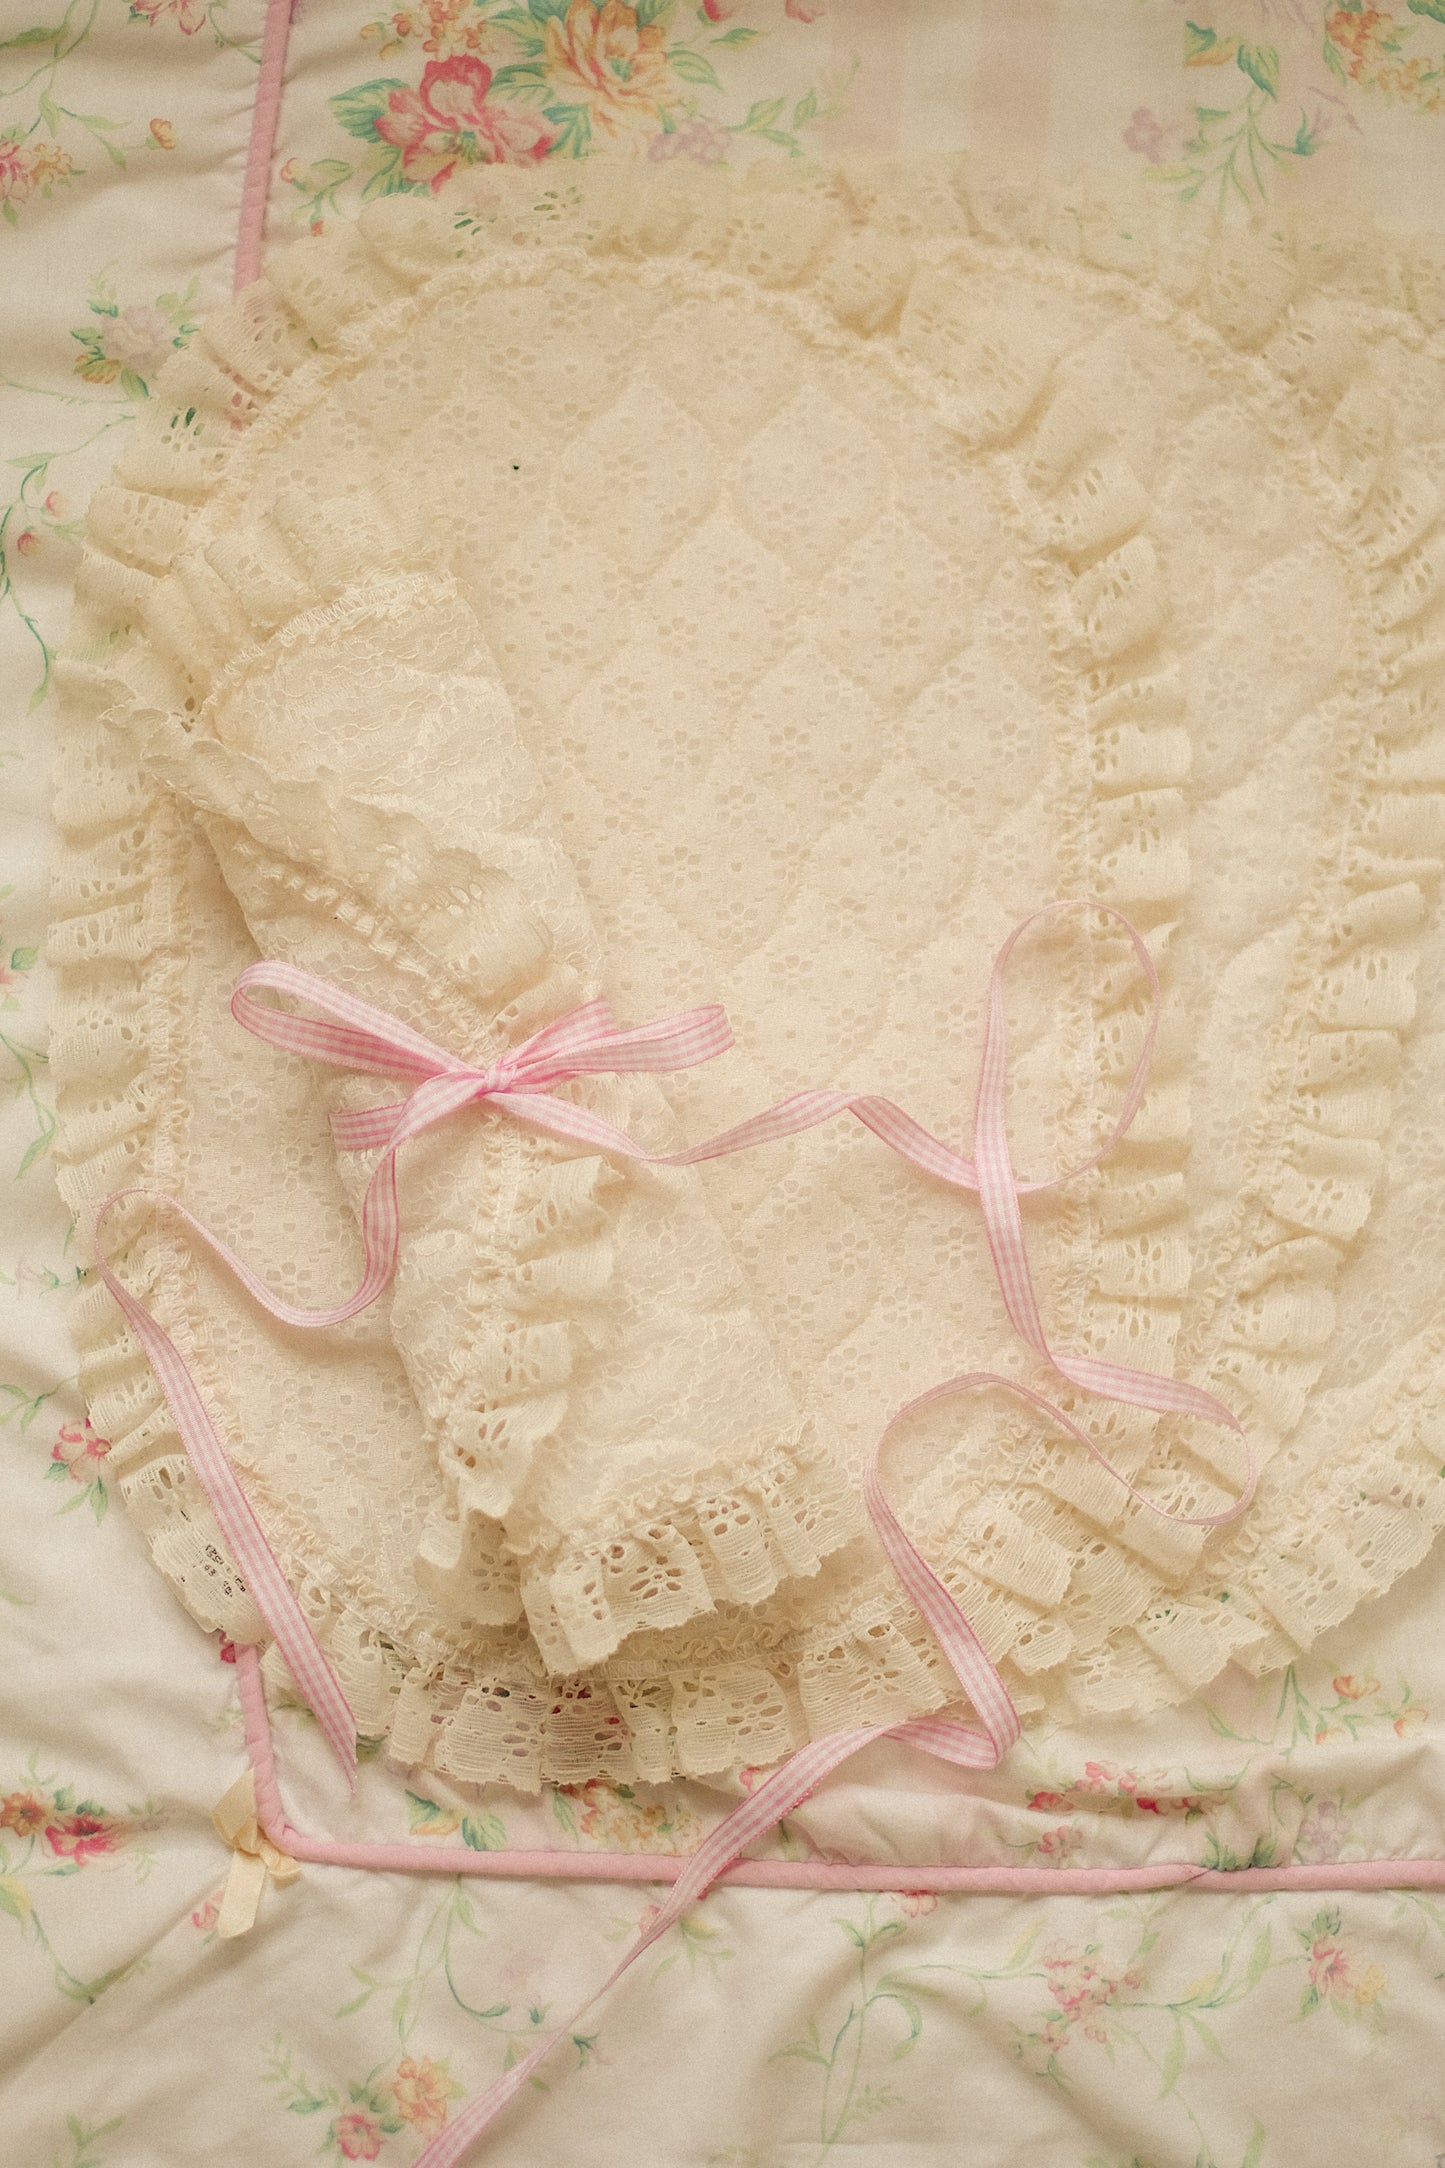 Vintage doily lace ruffled placemats ♡ Set of four